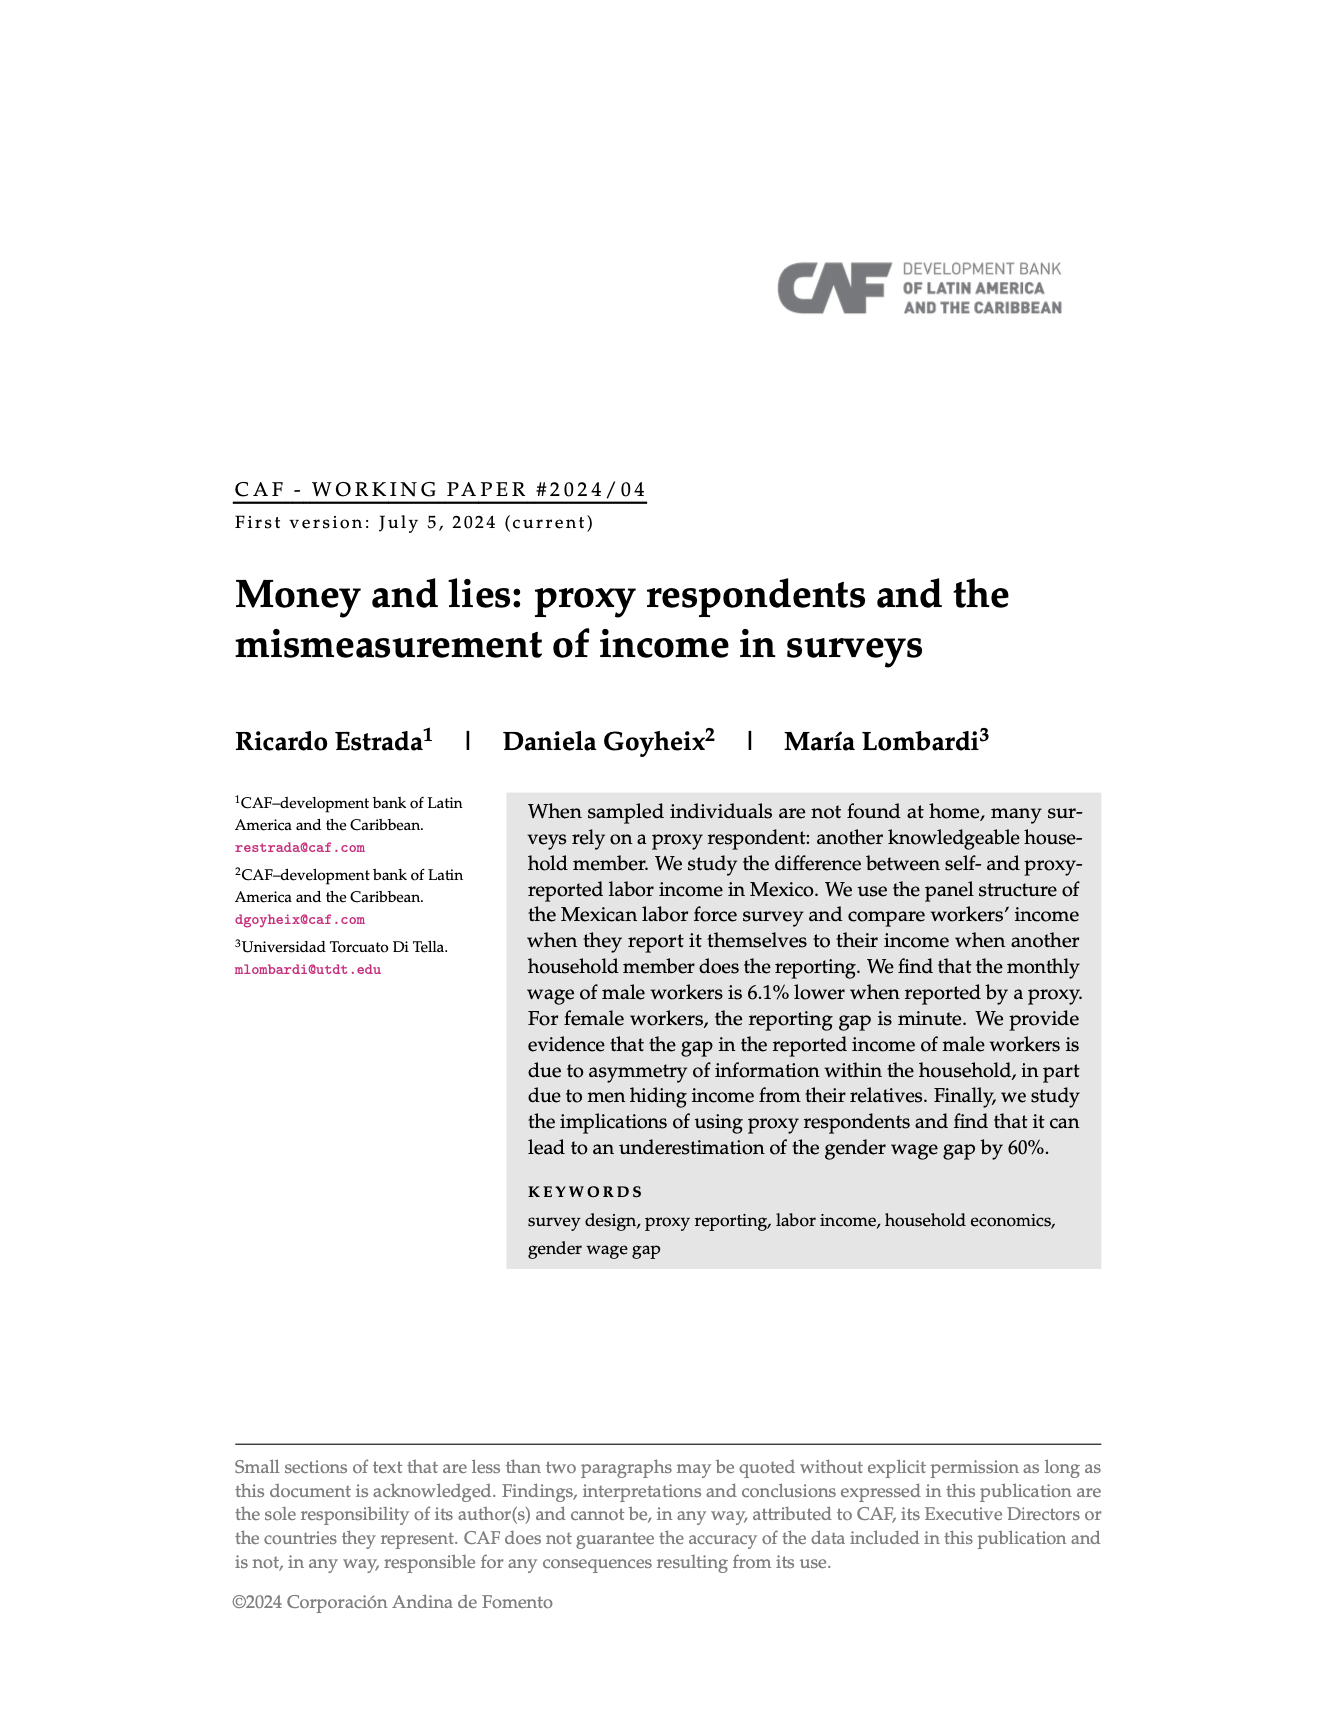 Money and lies: proxy respondents and the mismeasurement of income in surveys